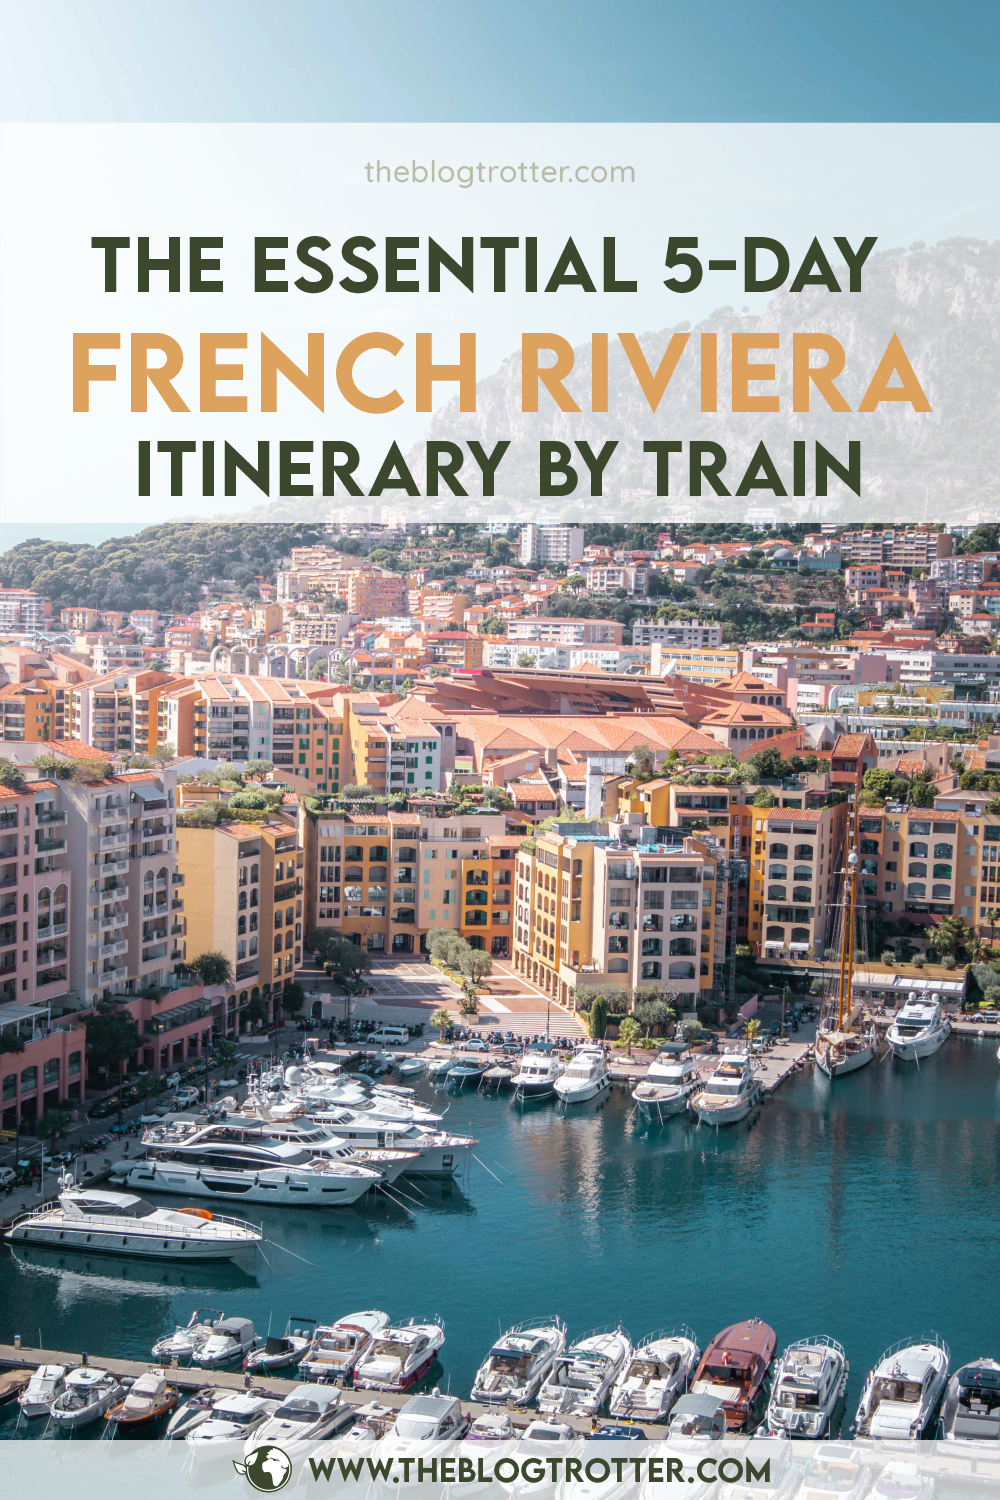 French riviera itinerary article visual for Pinterest - Option 5